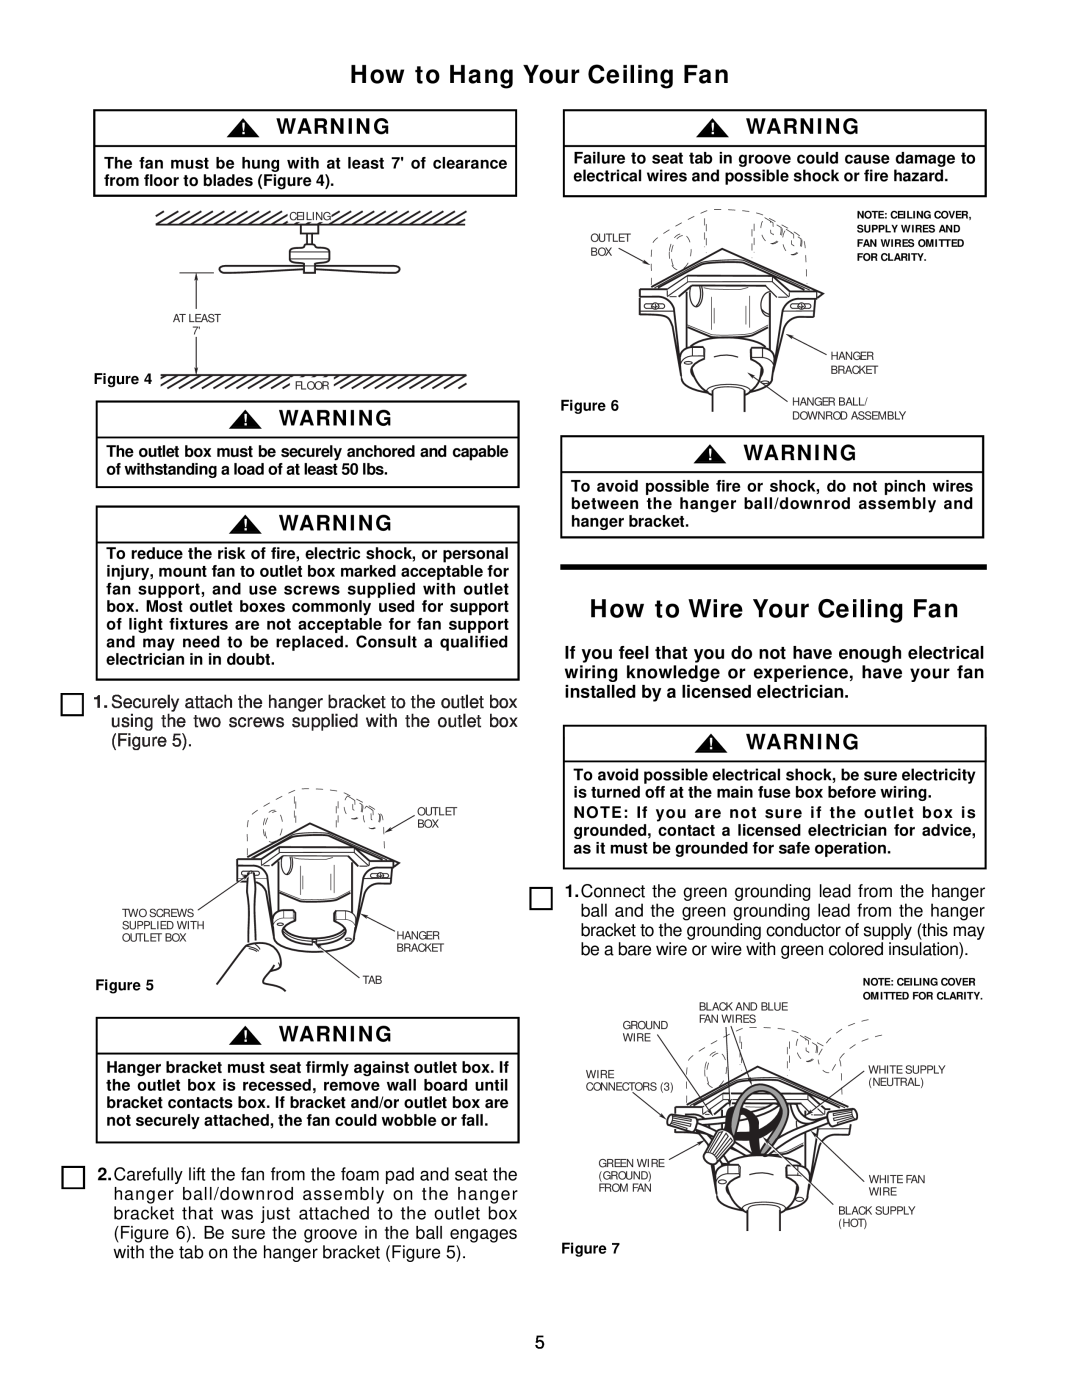 Emerson CF742PFWW, CF742PFOB warranty How to Hang Your Ceiling Fan, How to Wire Your Ceiling Fan 